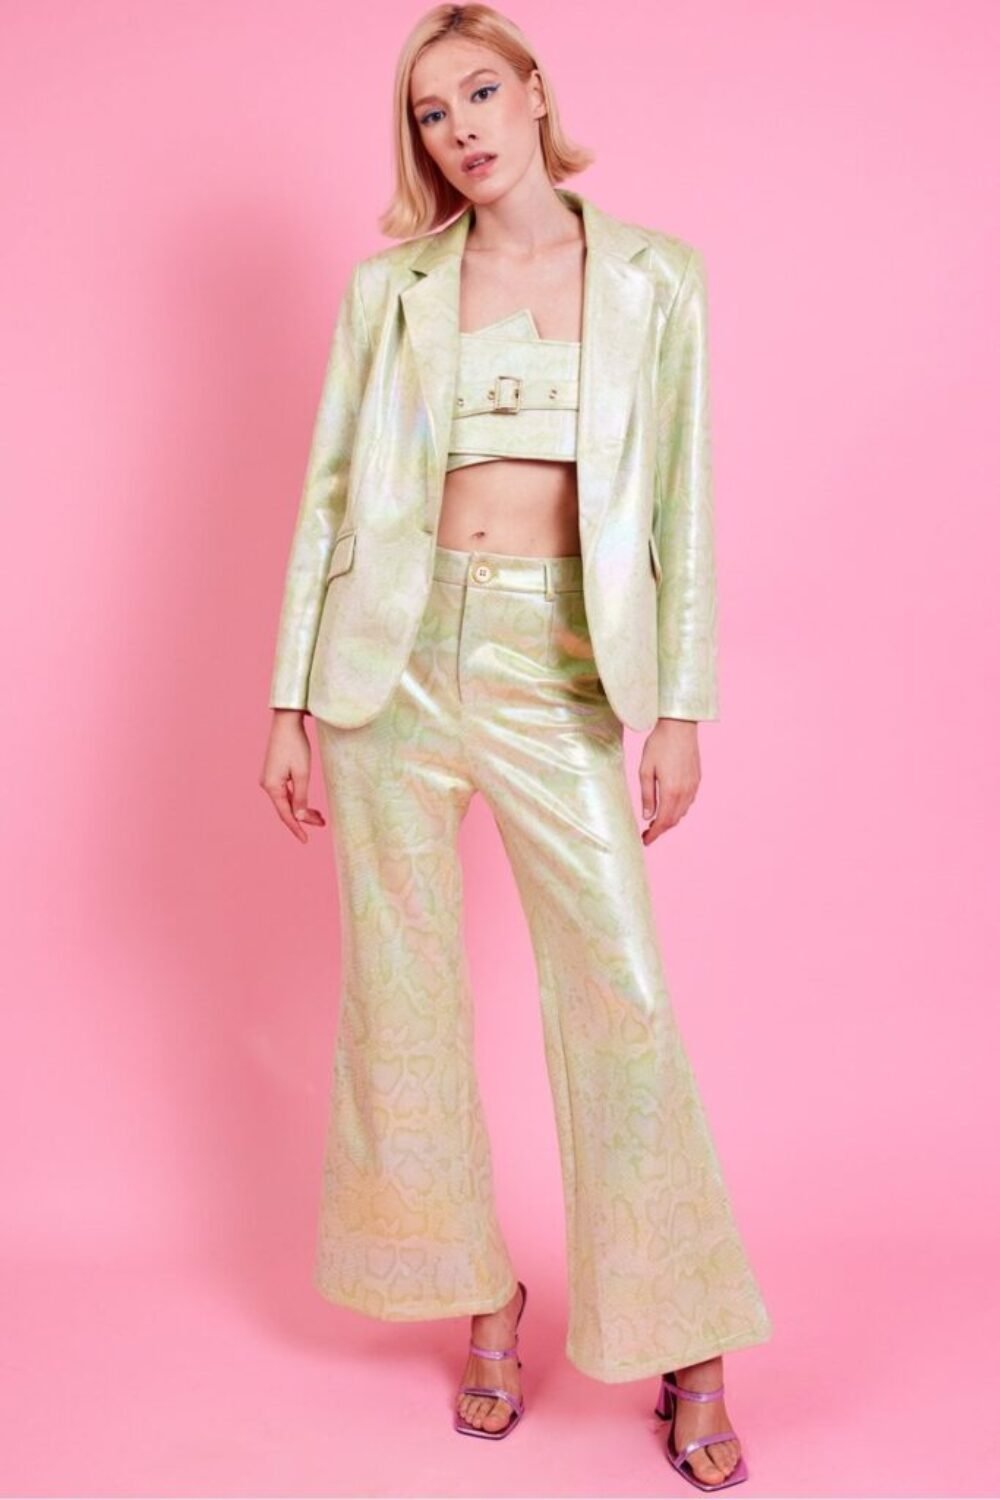 Shop Lux Metallic Green Eco Leather Trousers and women's luxury and designer clothes at www.lux-apparel.co.uk